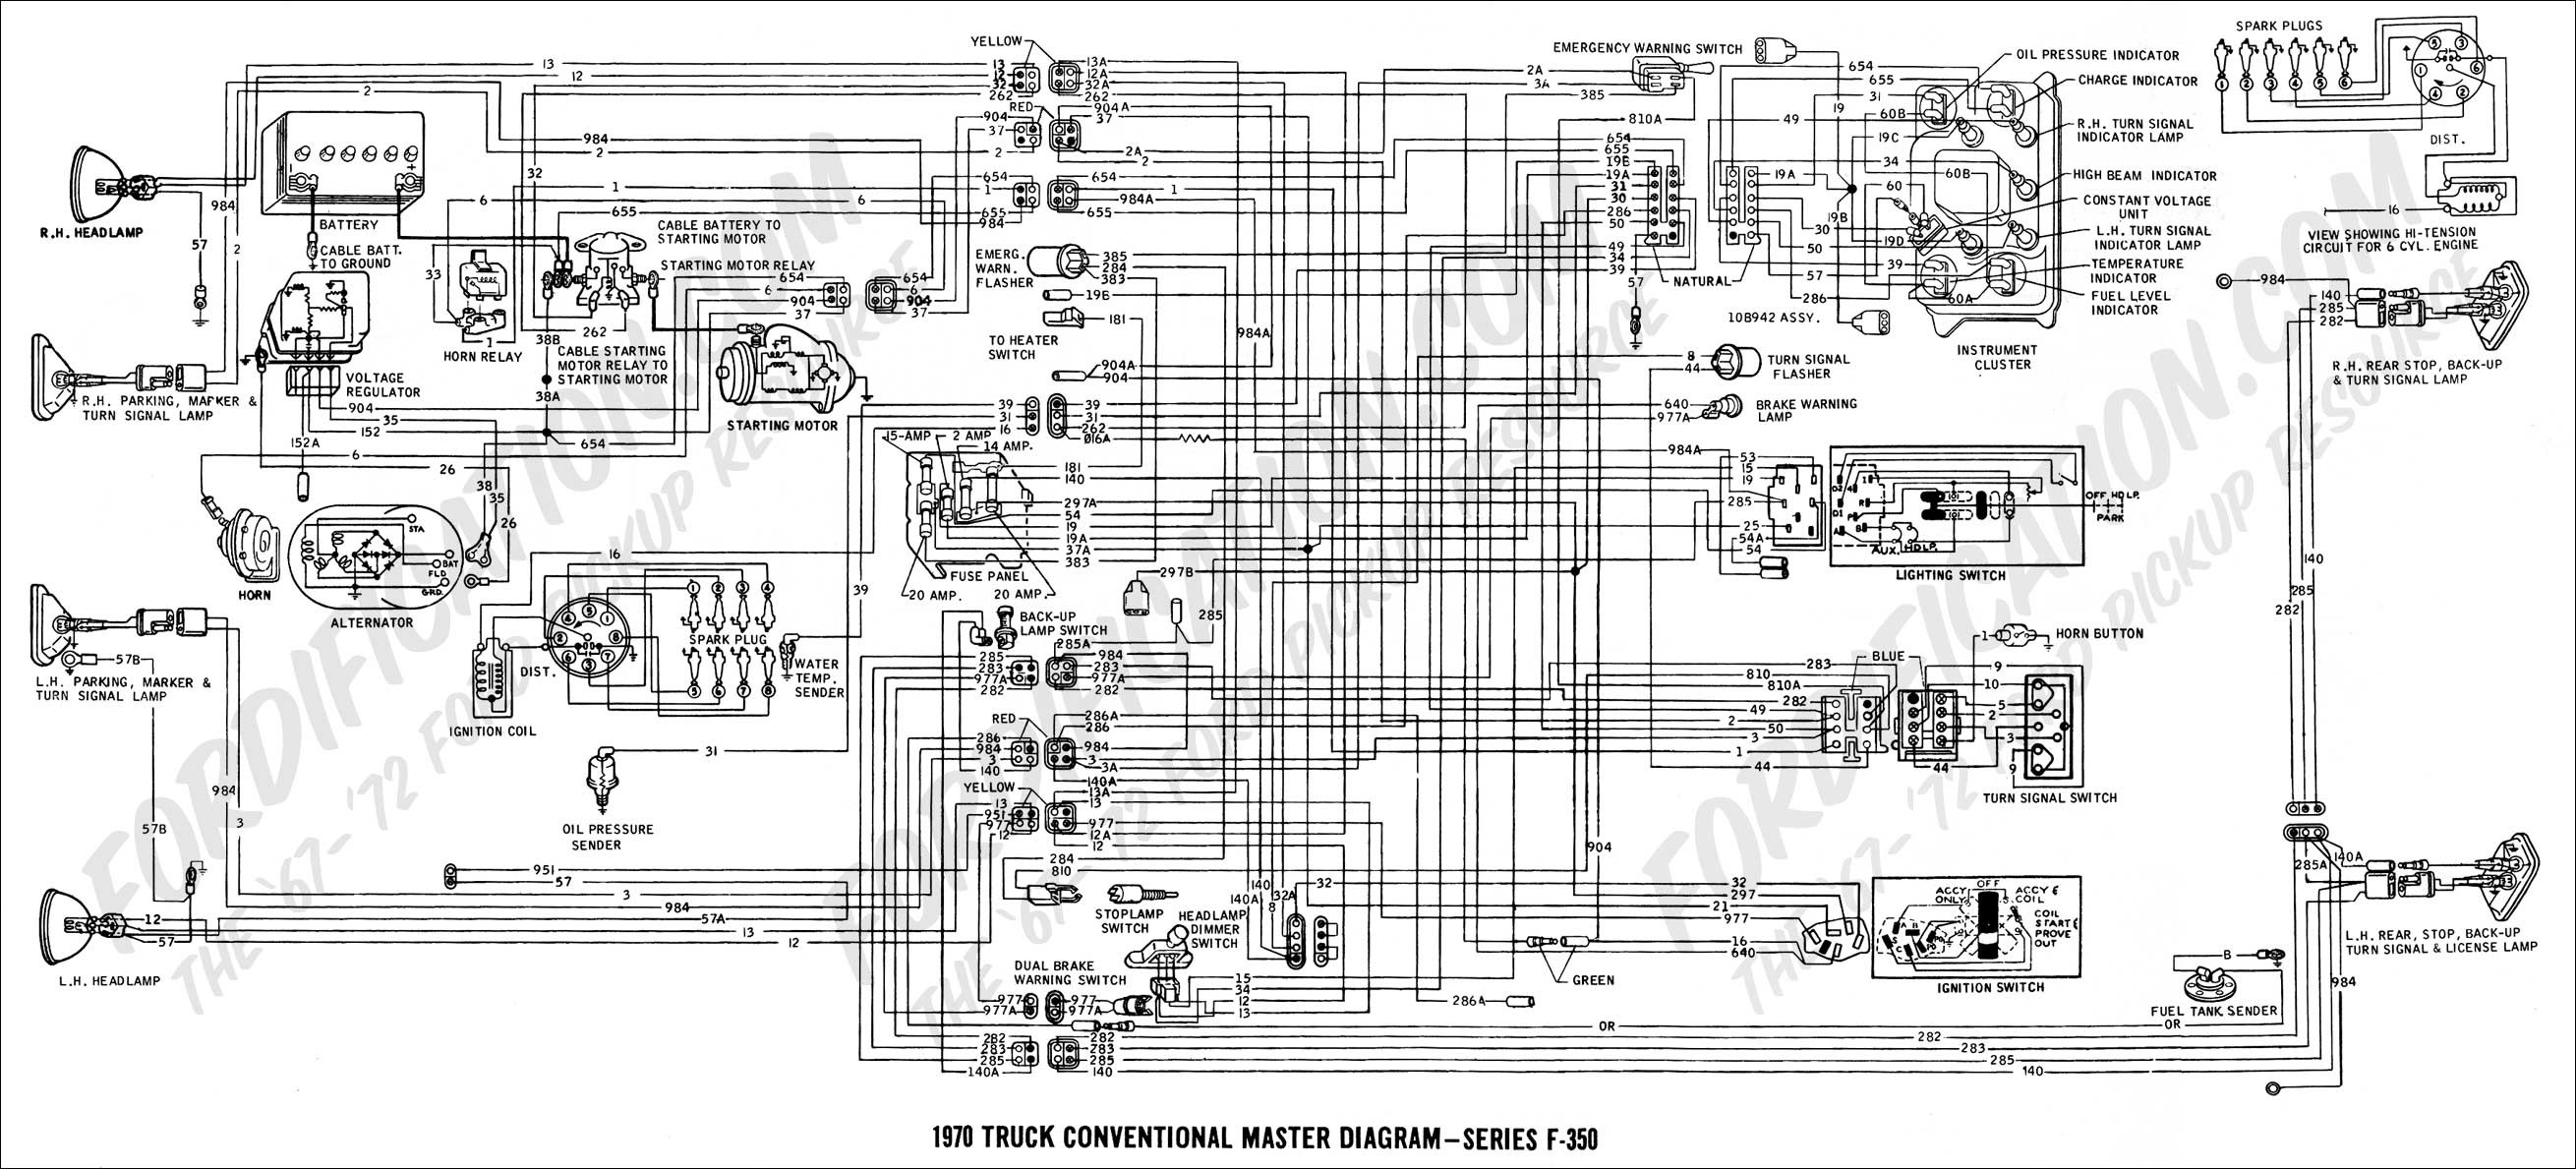 1998 ford Mustang Engine Diagram to 2007 ford Mustang Wiring Diagram Wiring Diagram Of 1998 ford Mustang Engine Diagram